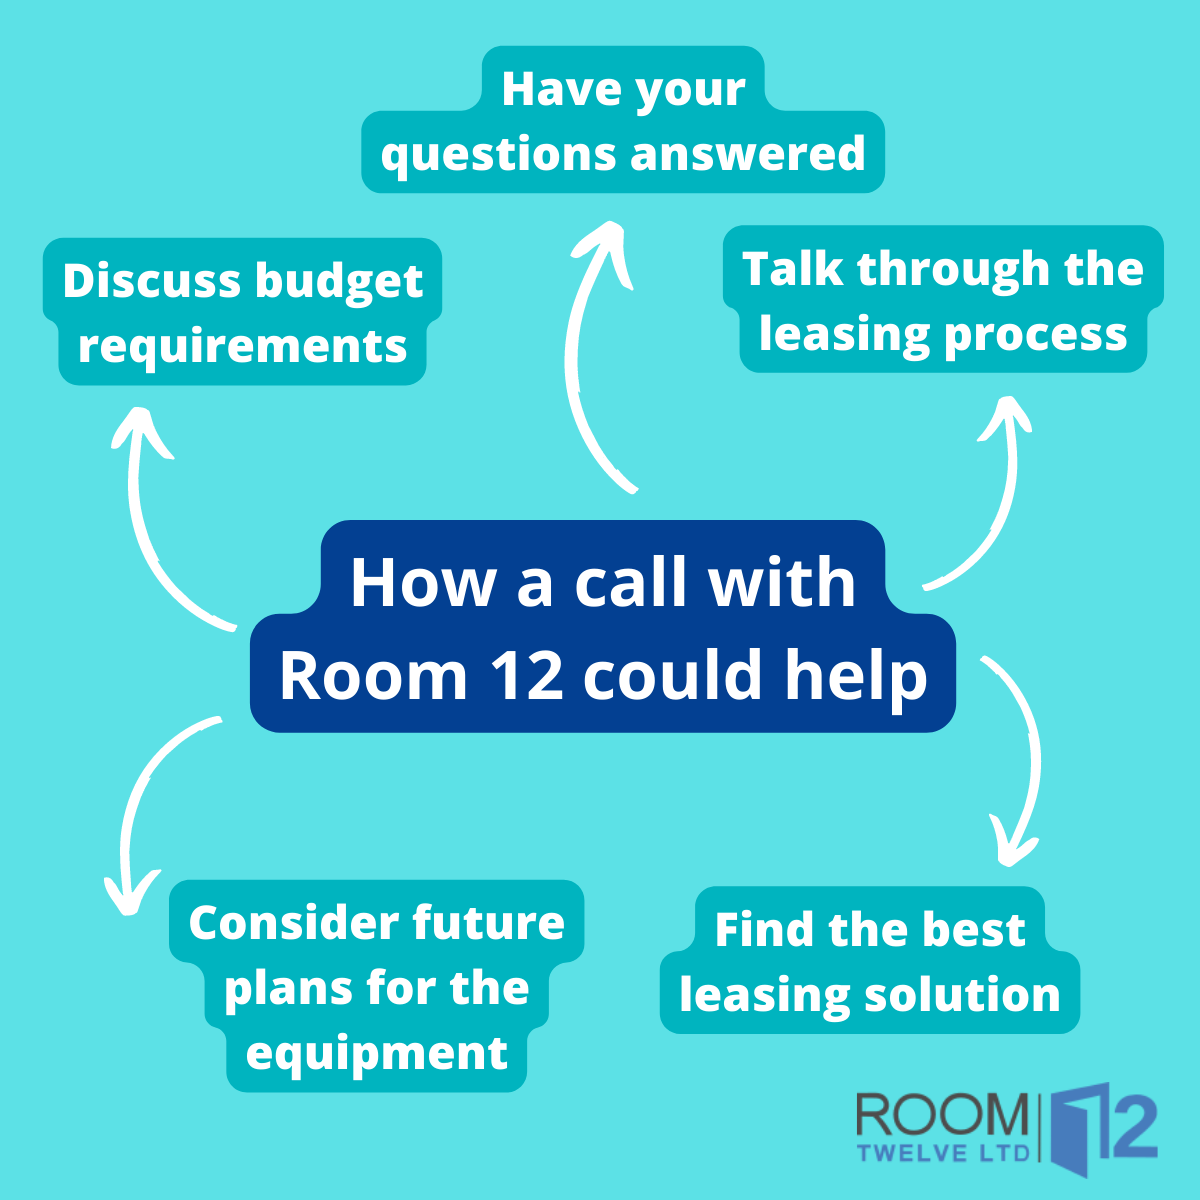 Graphic showing how a call with Room 12 could help school leaders manage budgets